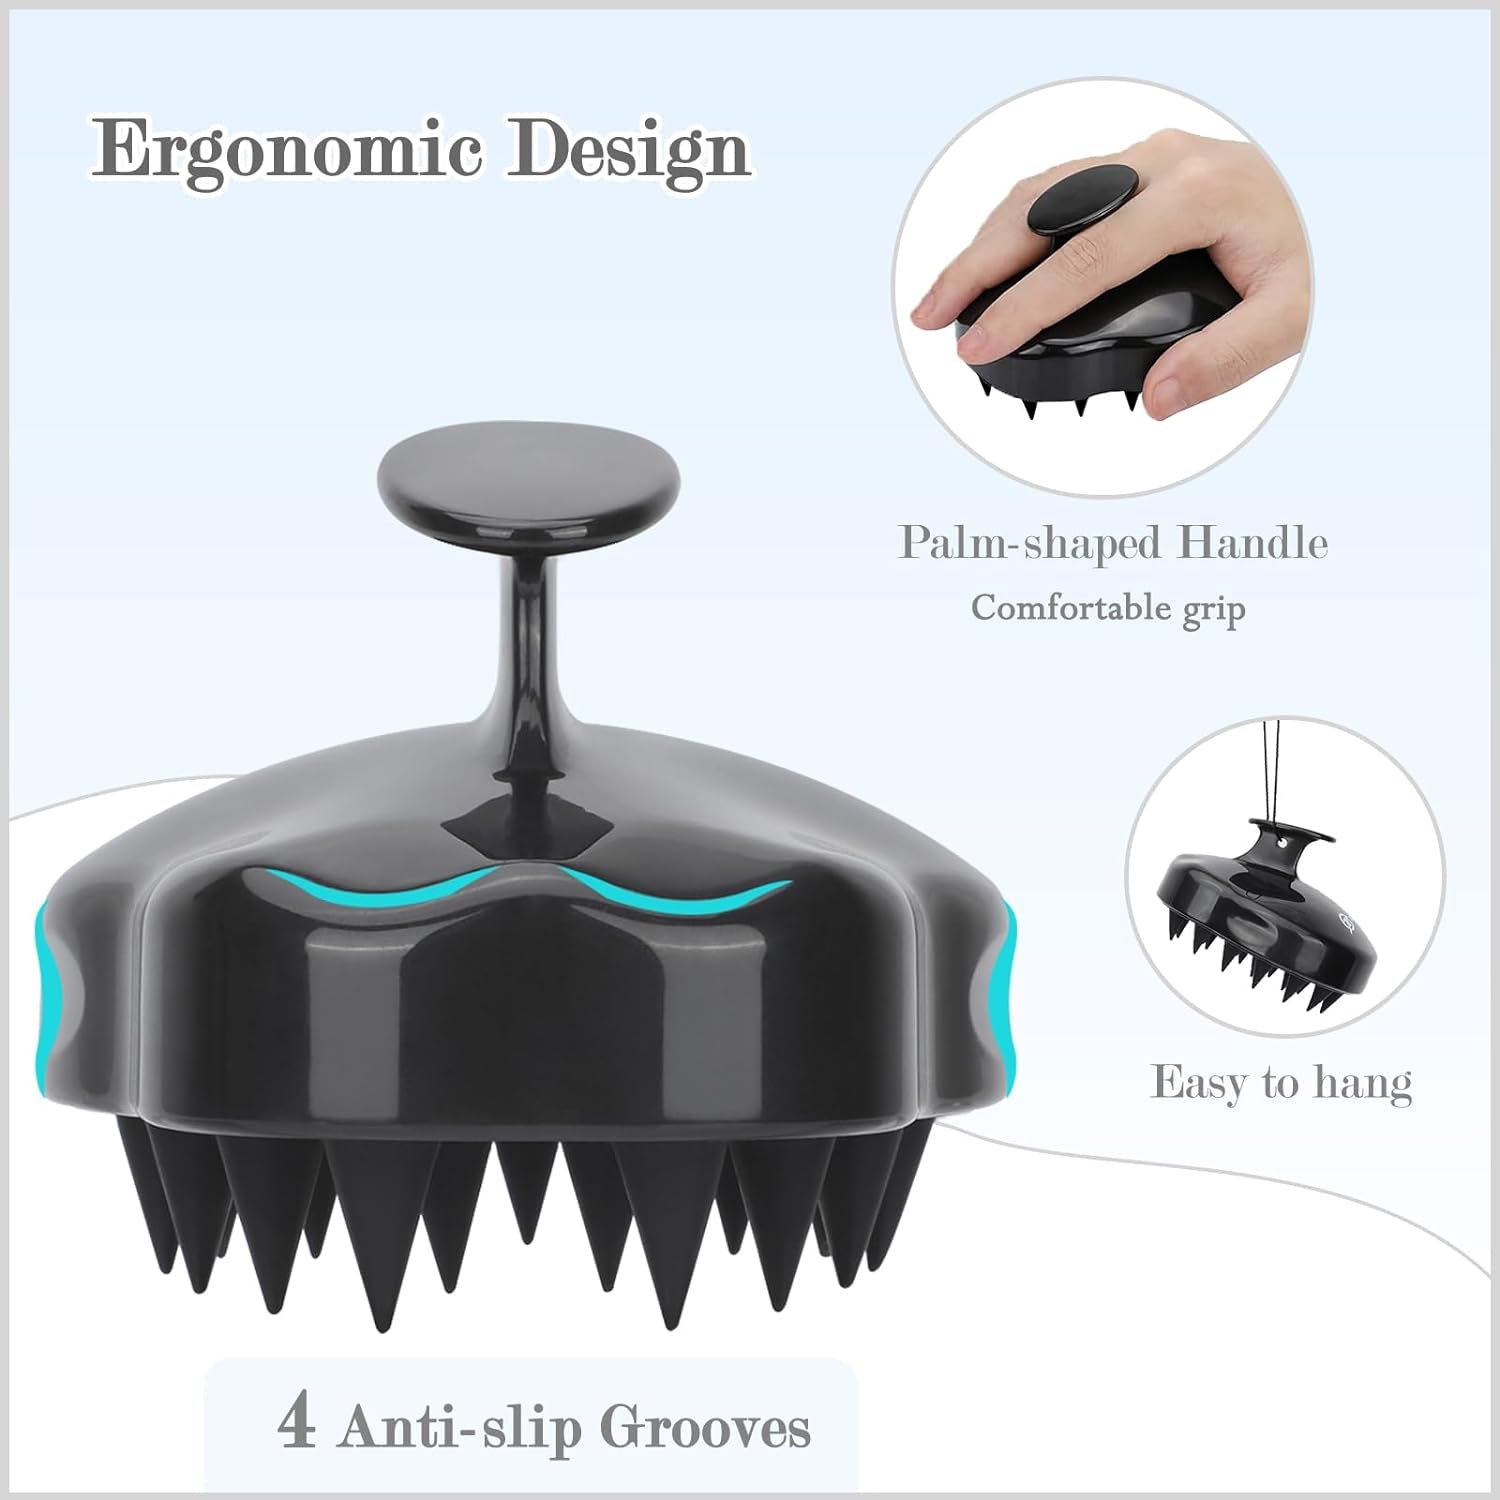 Hair Scalp Massager Shampoo Brush with Soft Silicone Bristles for Scalp Care and Hair Growth, Shower Head Scalp Scrubber Exfoliator for Dandruff, Wet & Dry for Men, Women and Kids, Black